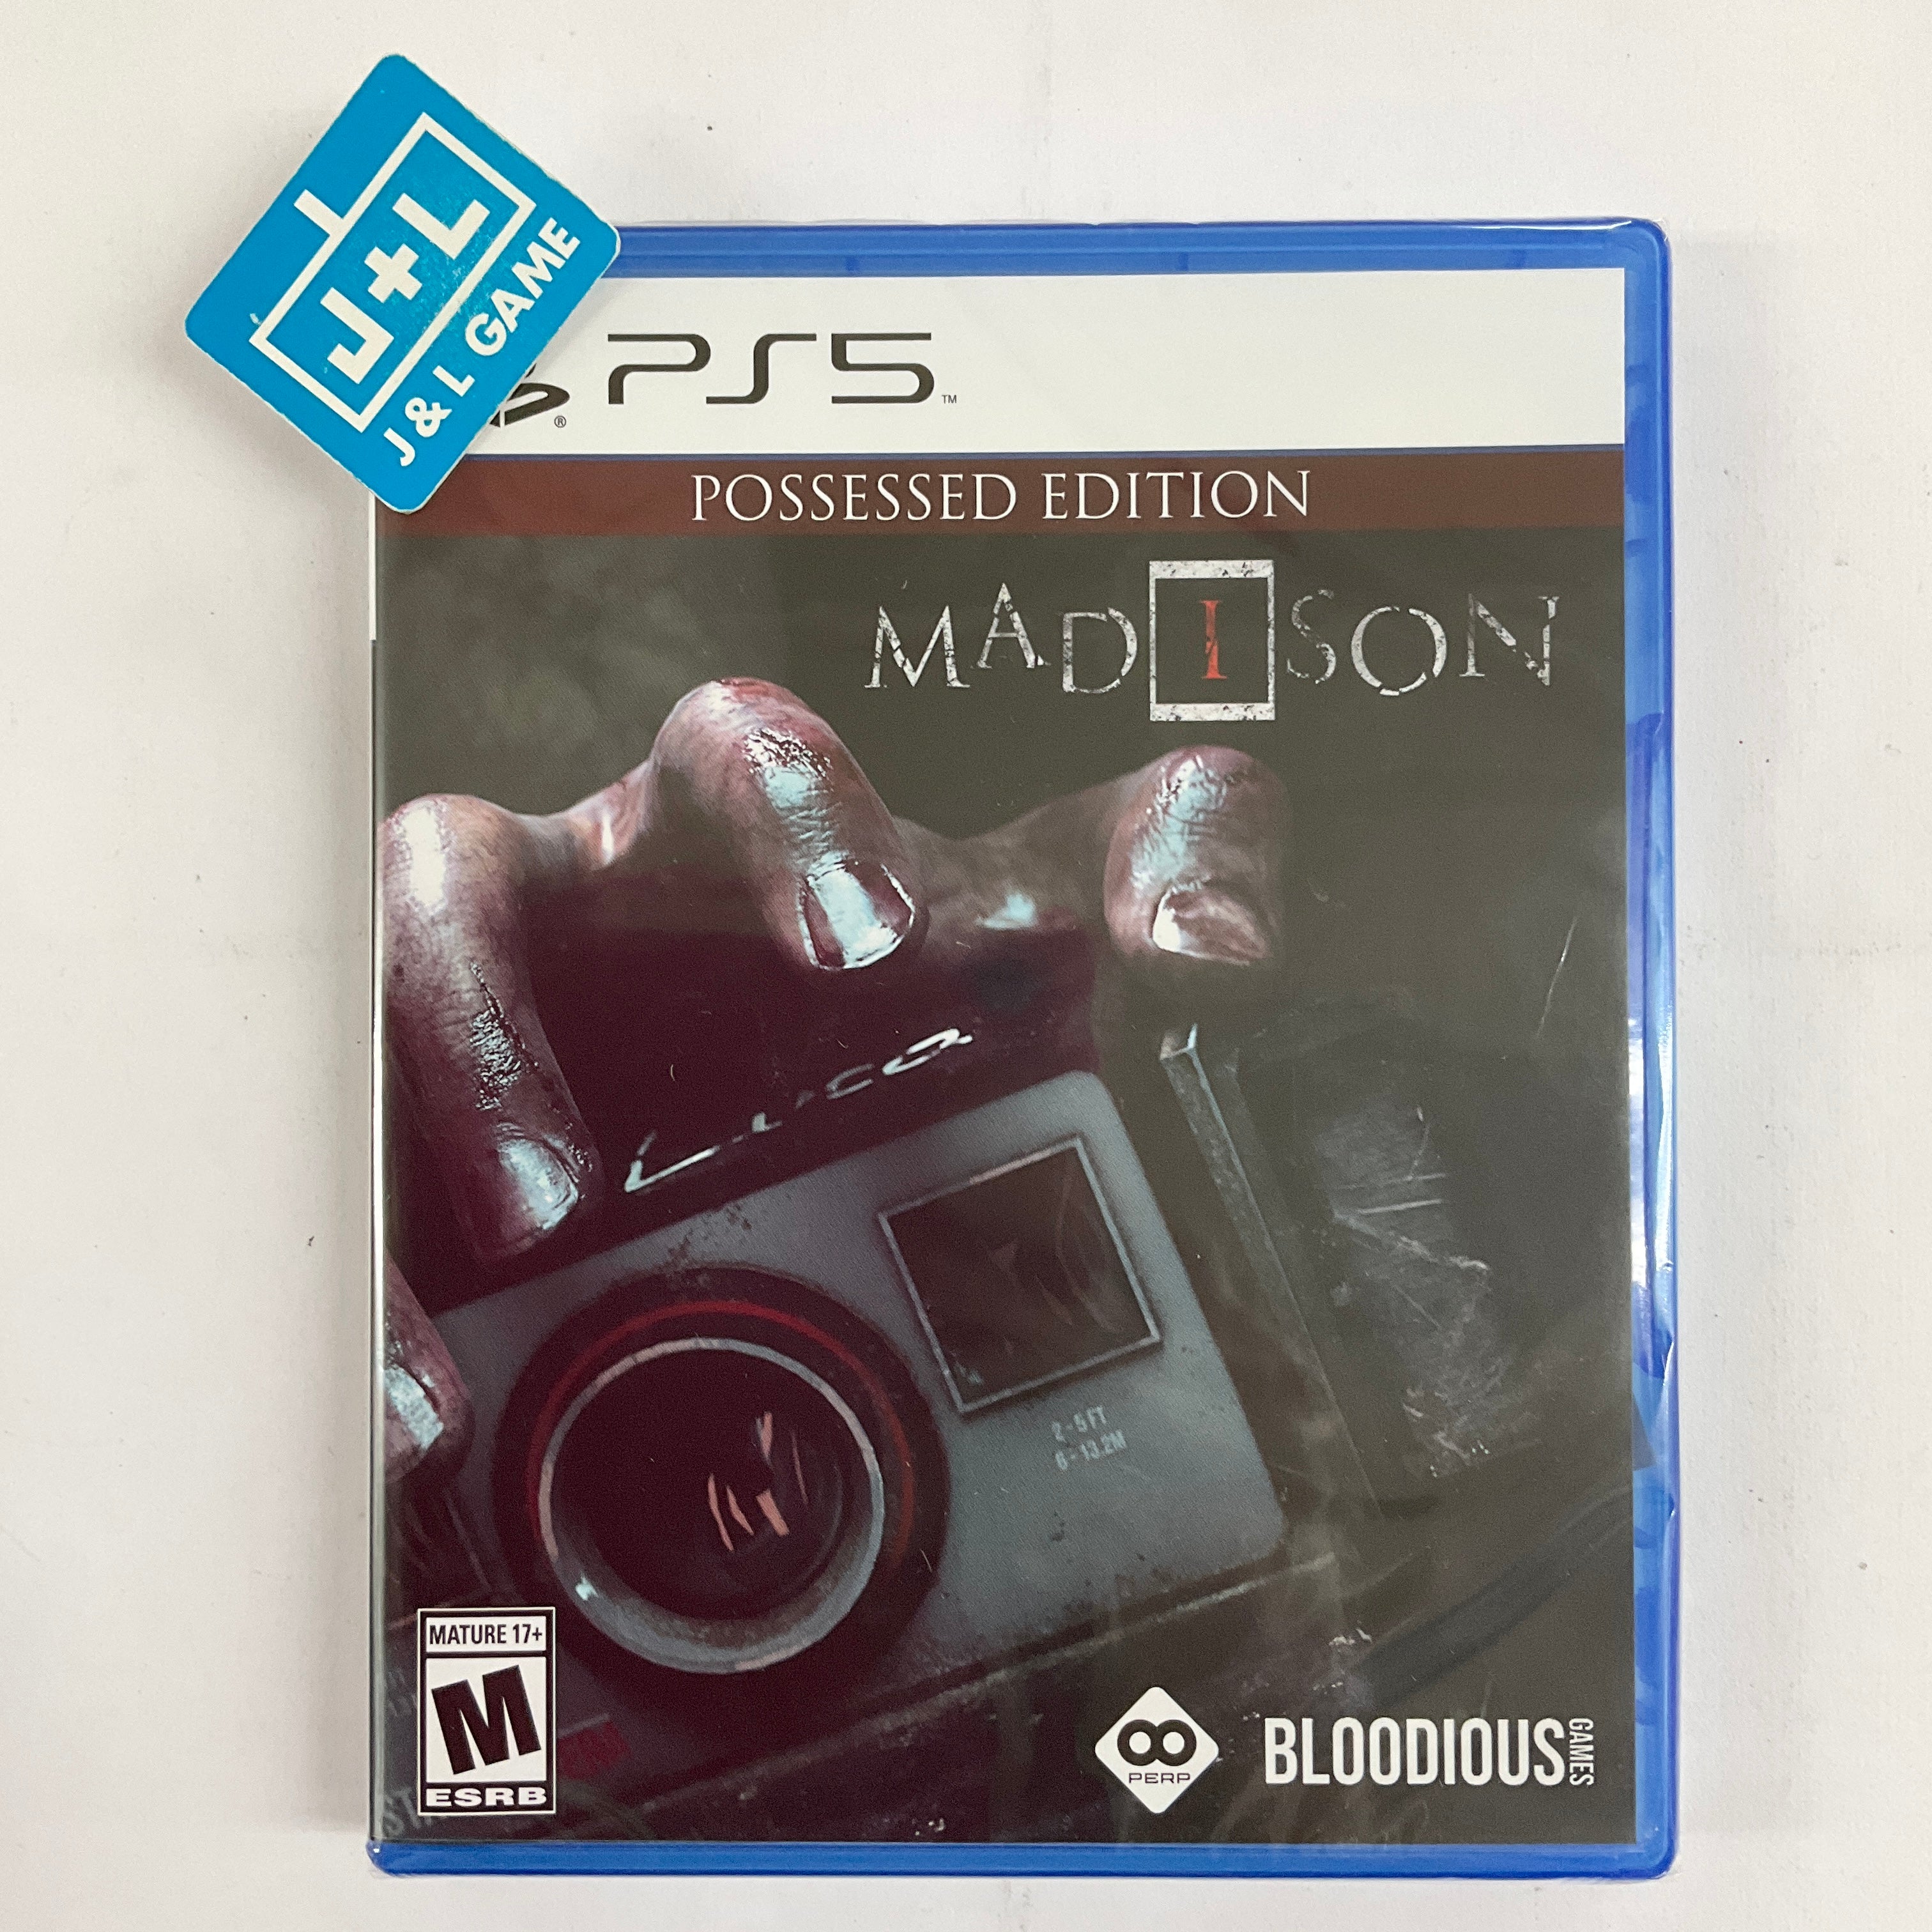 MADiSON (Possessed Edition) - (PS5) PlayStation 5 Video Games U&I Entertainment   